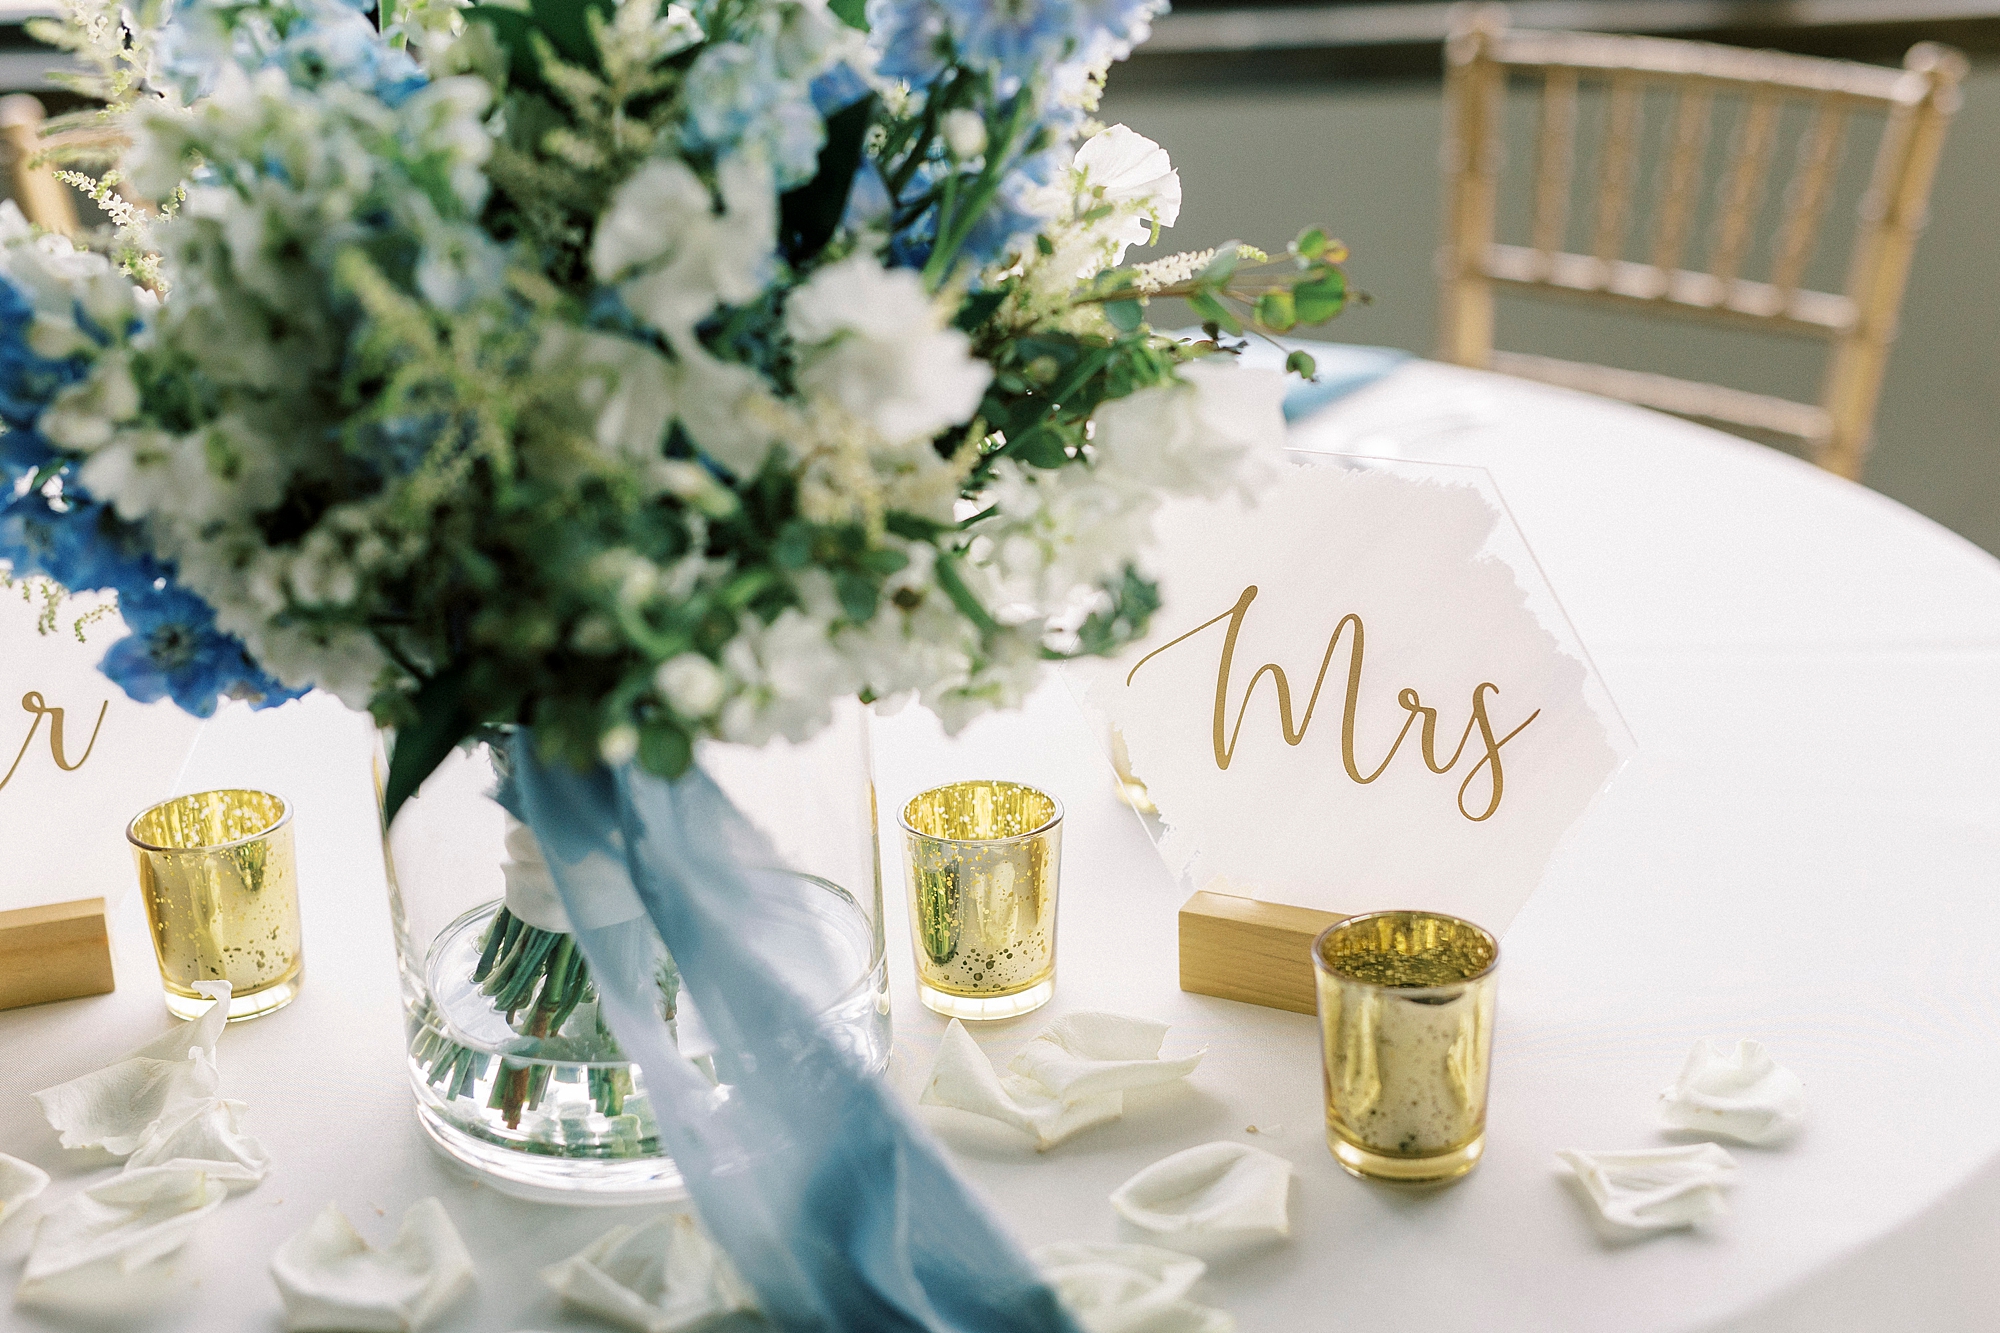 wedding reception centerpiece with calligraphy MRS on acrylic sign